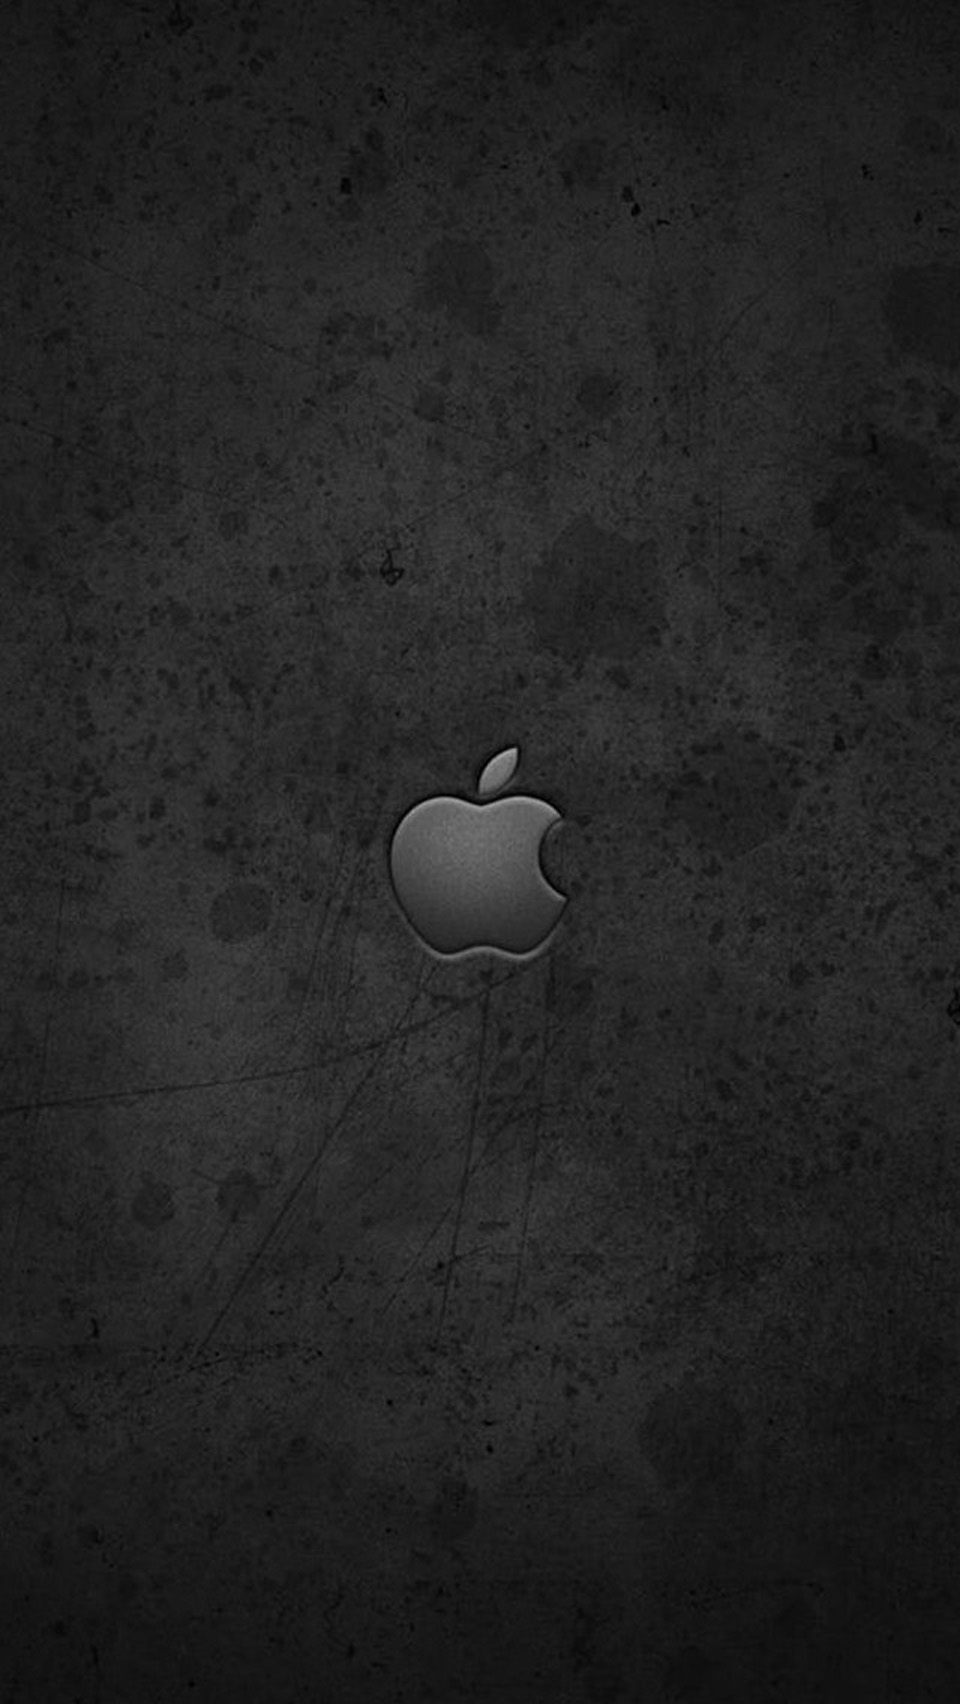 Apple Logo Wallpaper For Iphone 6 photos of Iphone Wallpaper Size